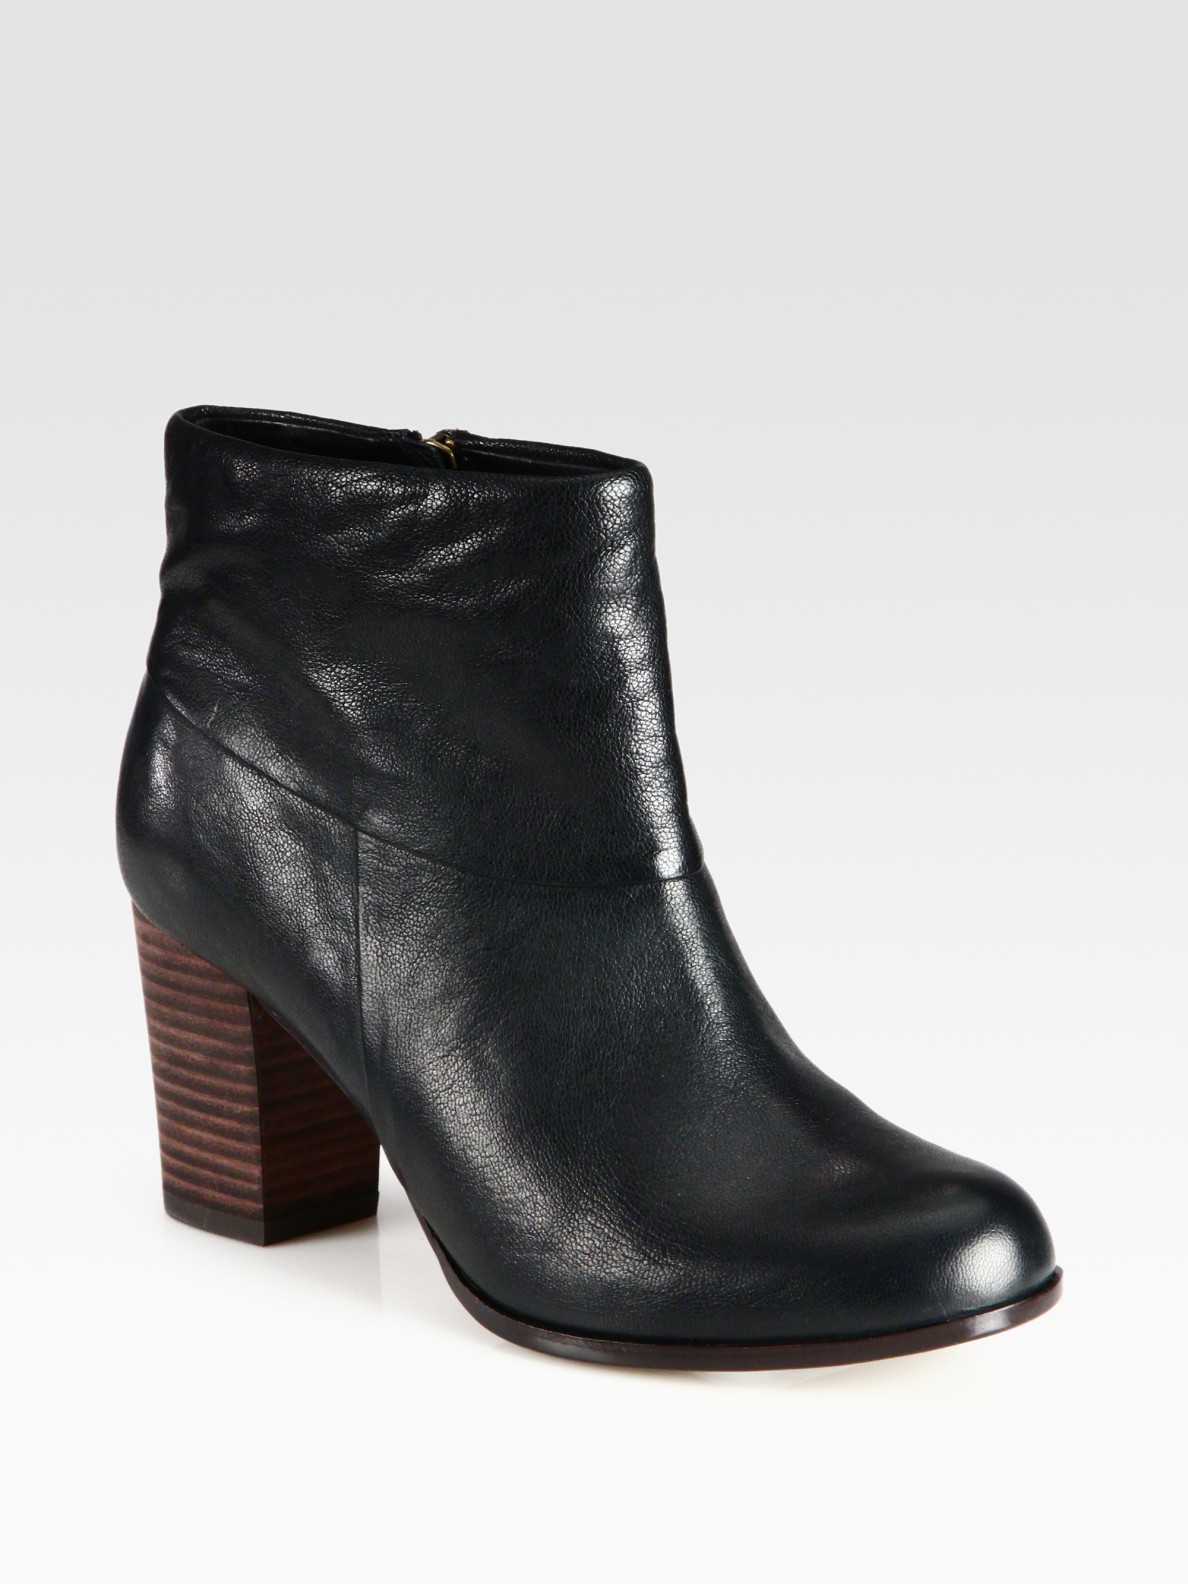 Cole Haan Cassidy Leather Ankle Boots in Black | Lyst